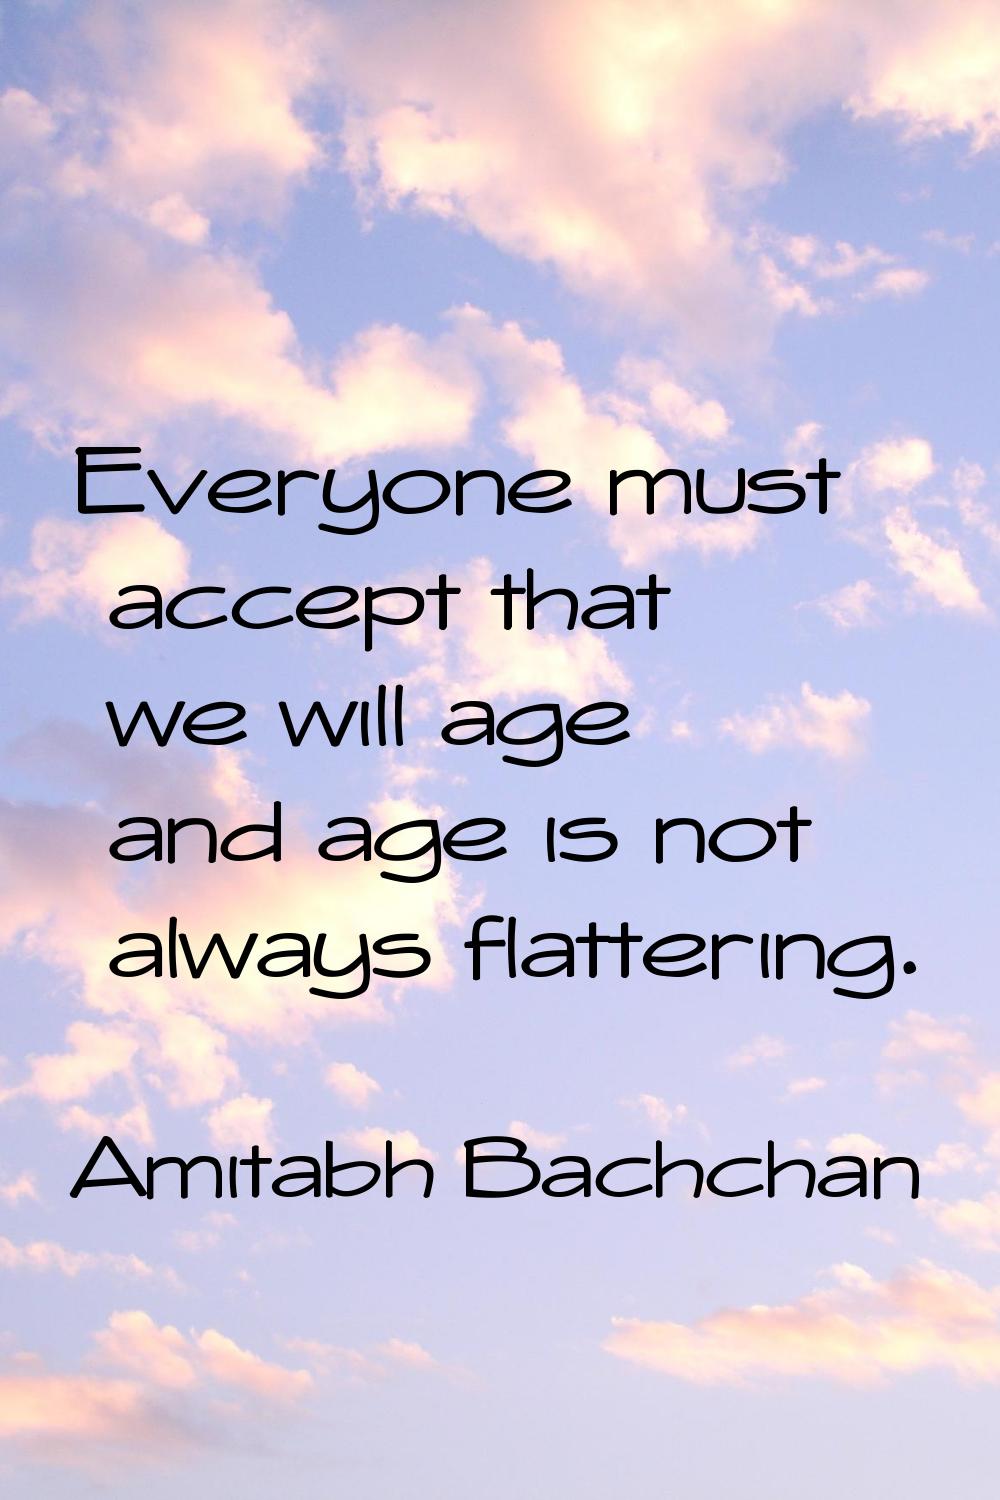 Everyone must accept that we will age and age is not always flattering.